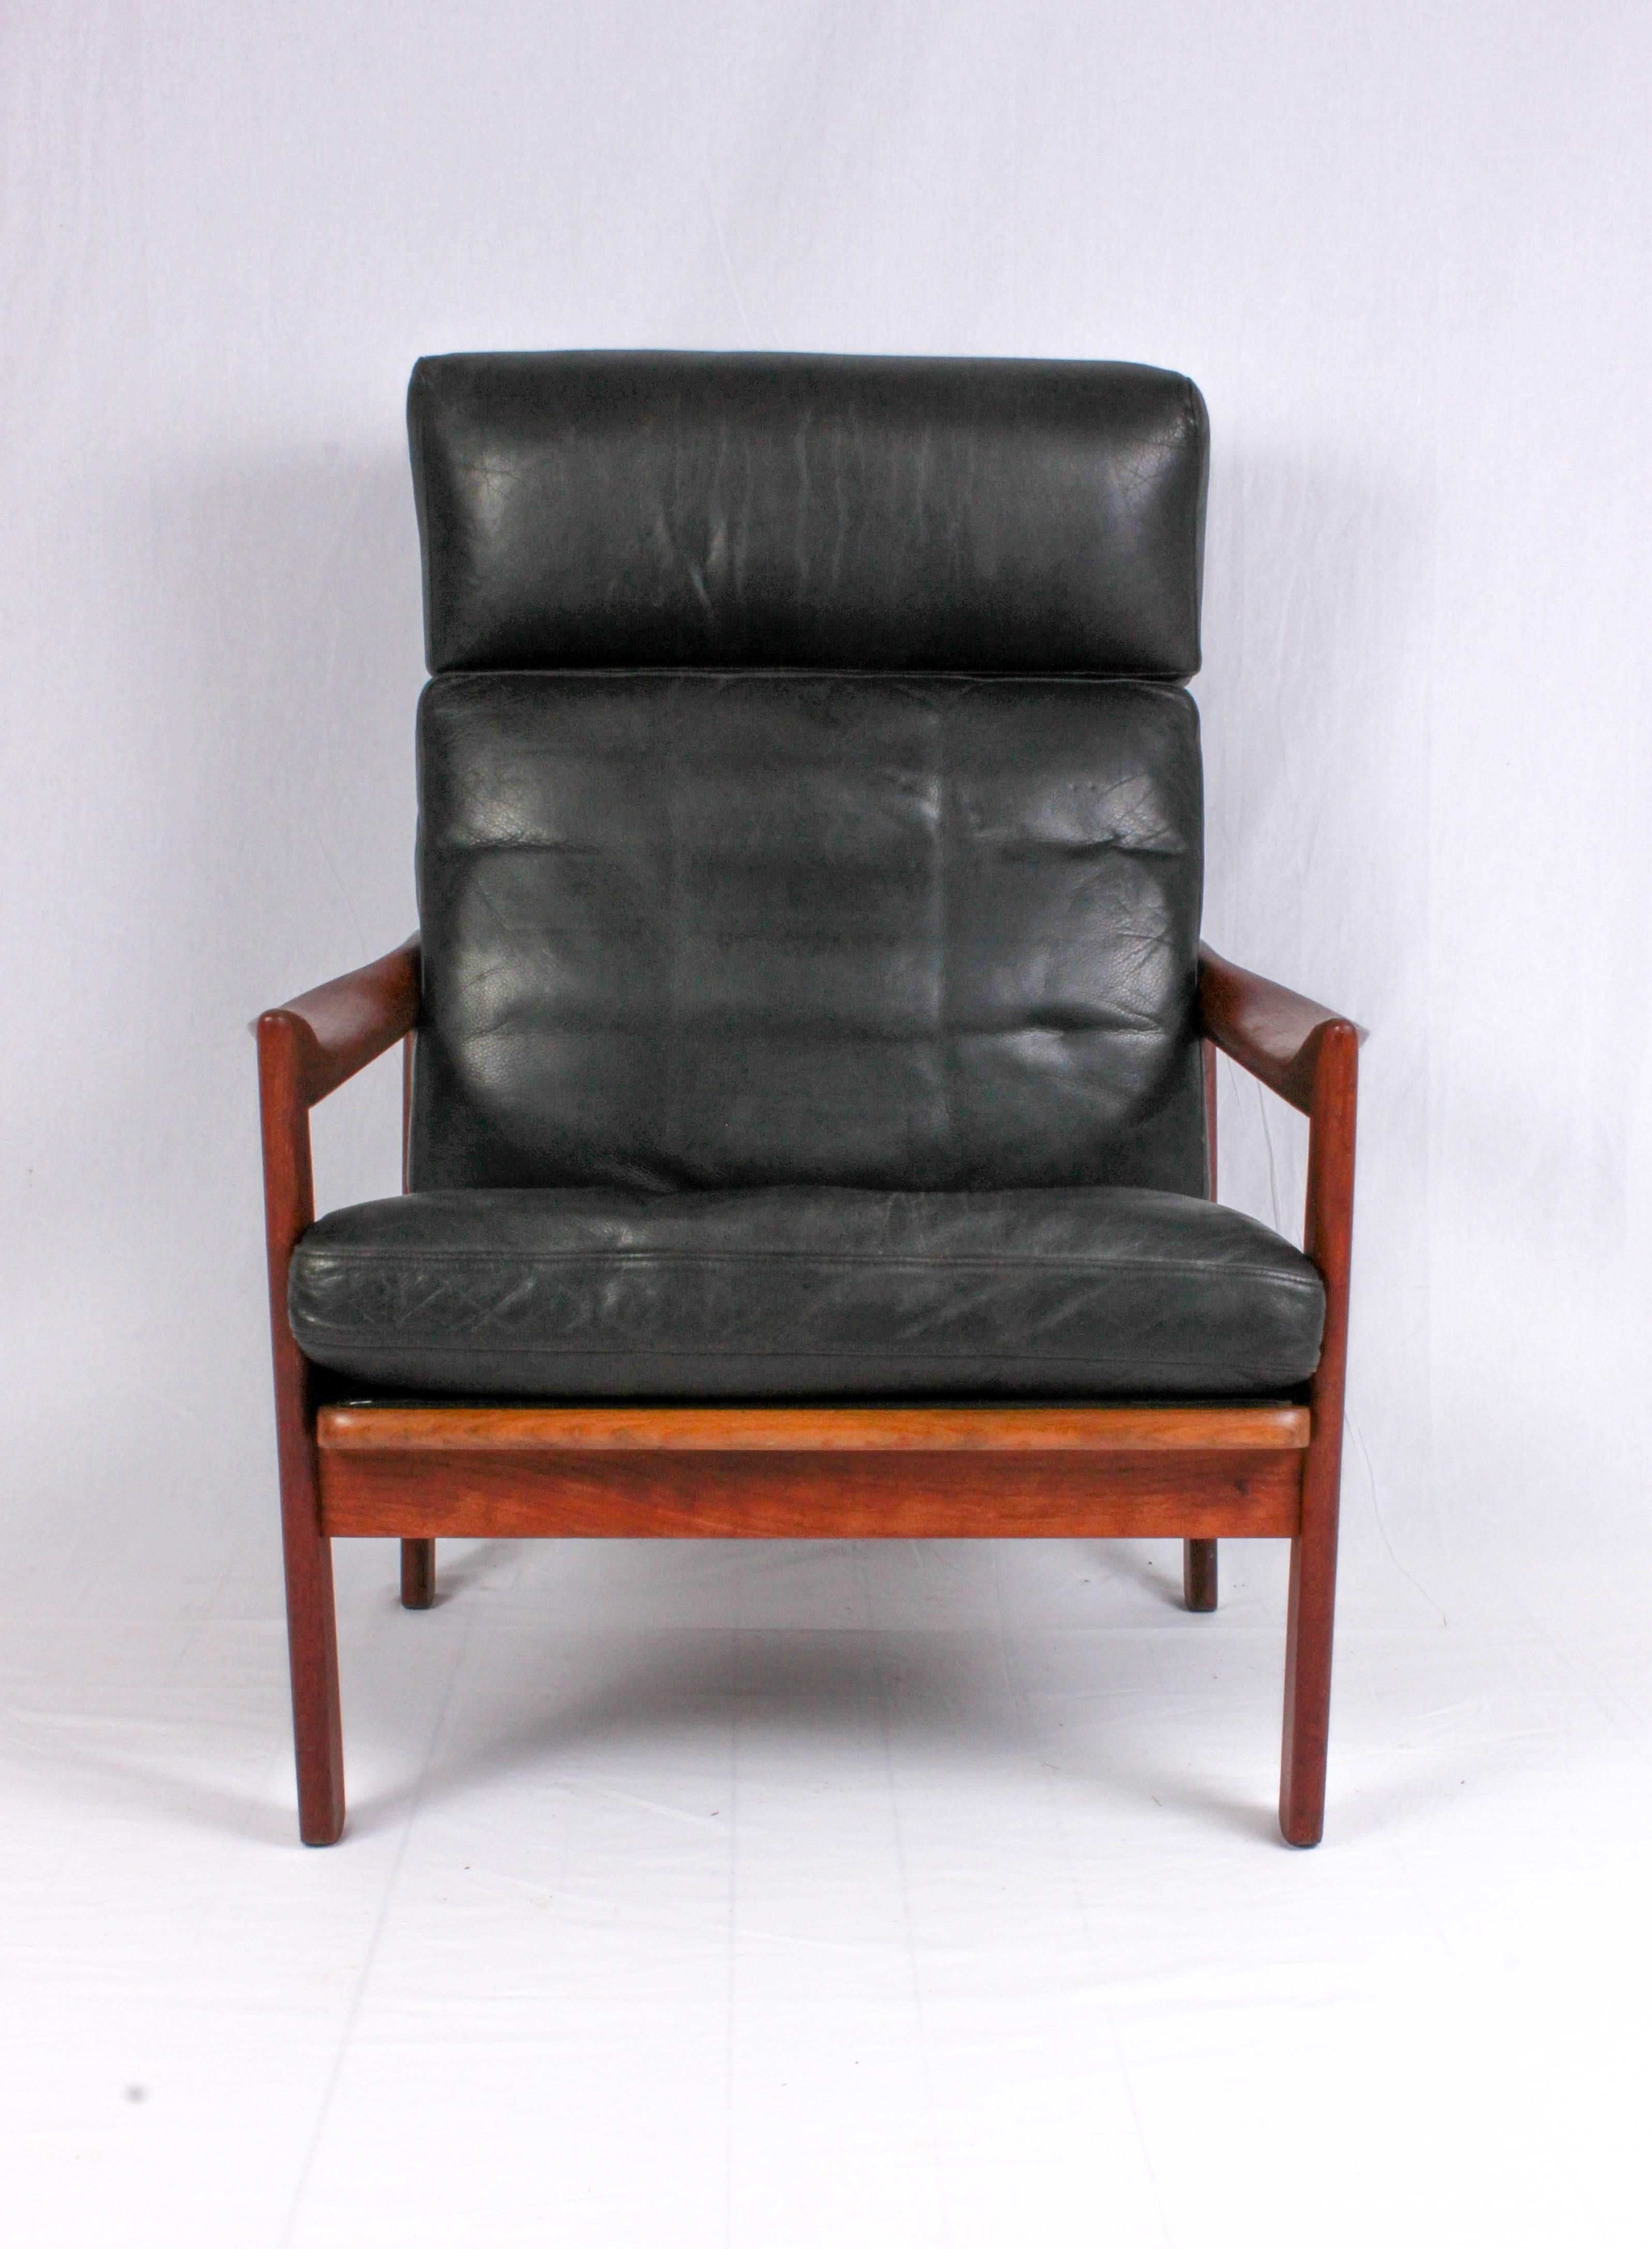 This midcentury teak high-back armchair is designed by Danish designer Illum Wikkelsø and produced by Niels Eilersen. The chair has beautiful twisted armrests and original leather upholstery with minor signs of usage and patina. A very decorative